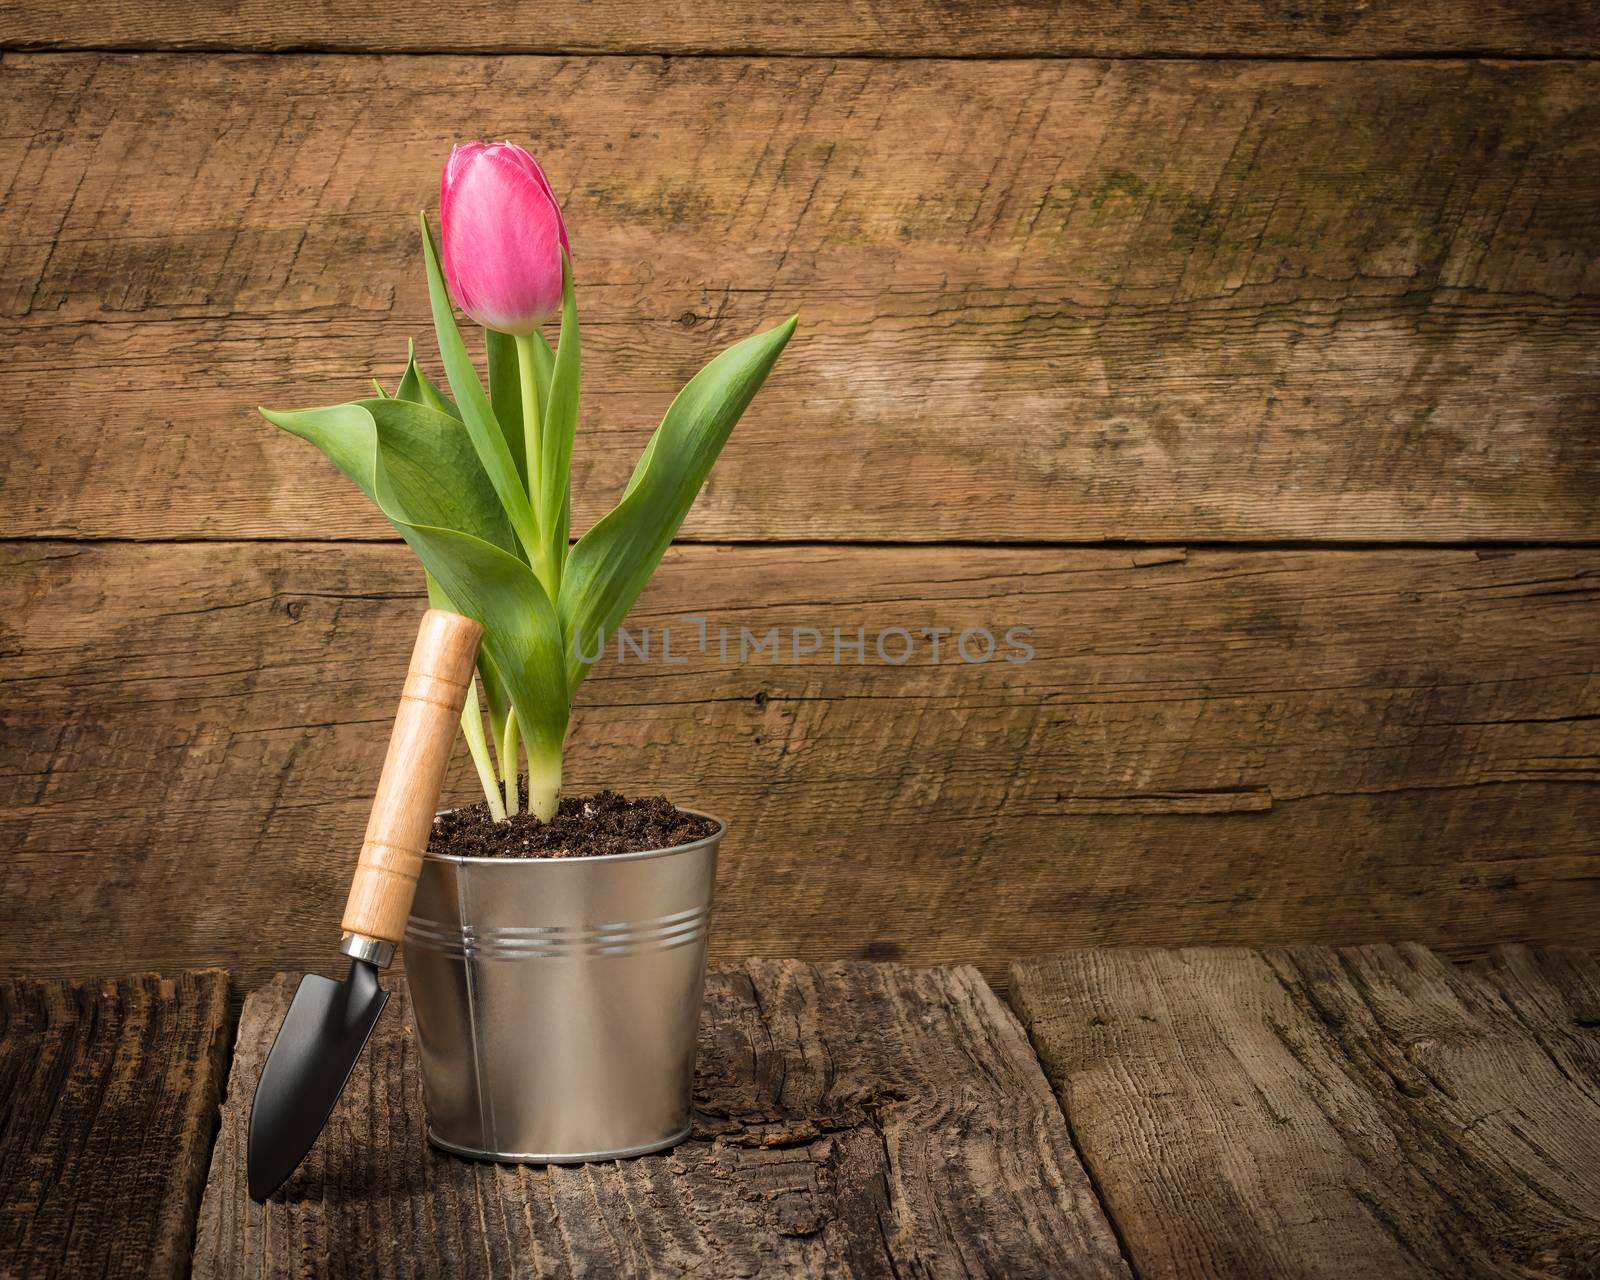 Pink Tulip on Wood Background by billberryphotography